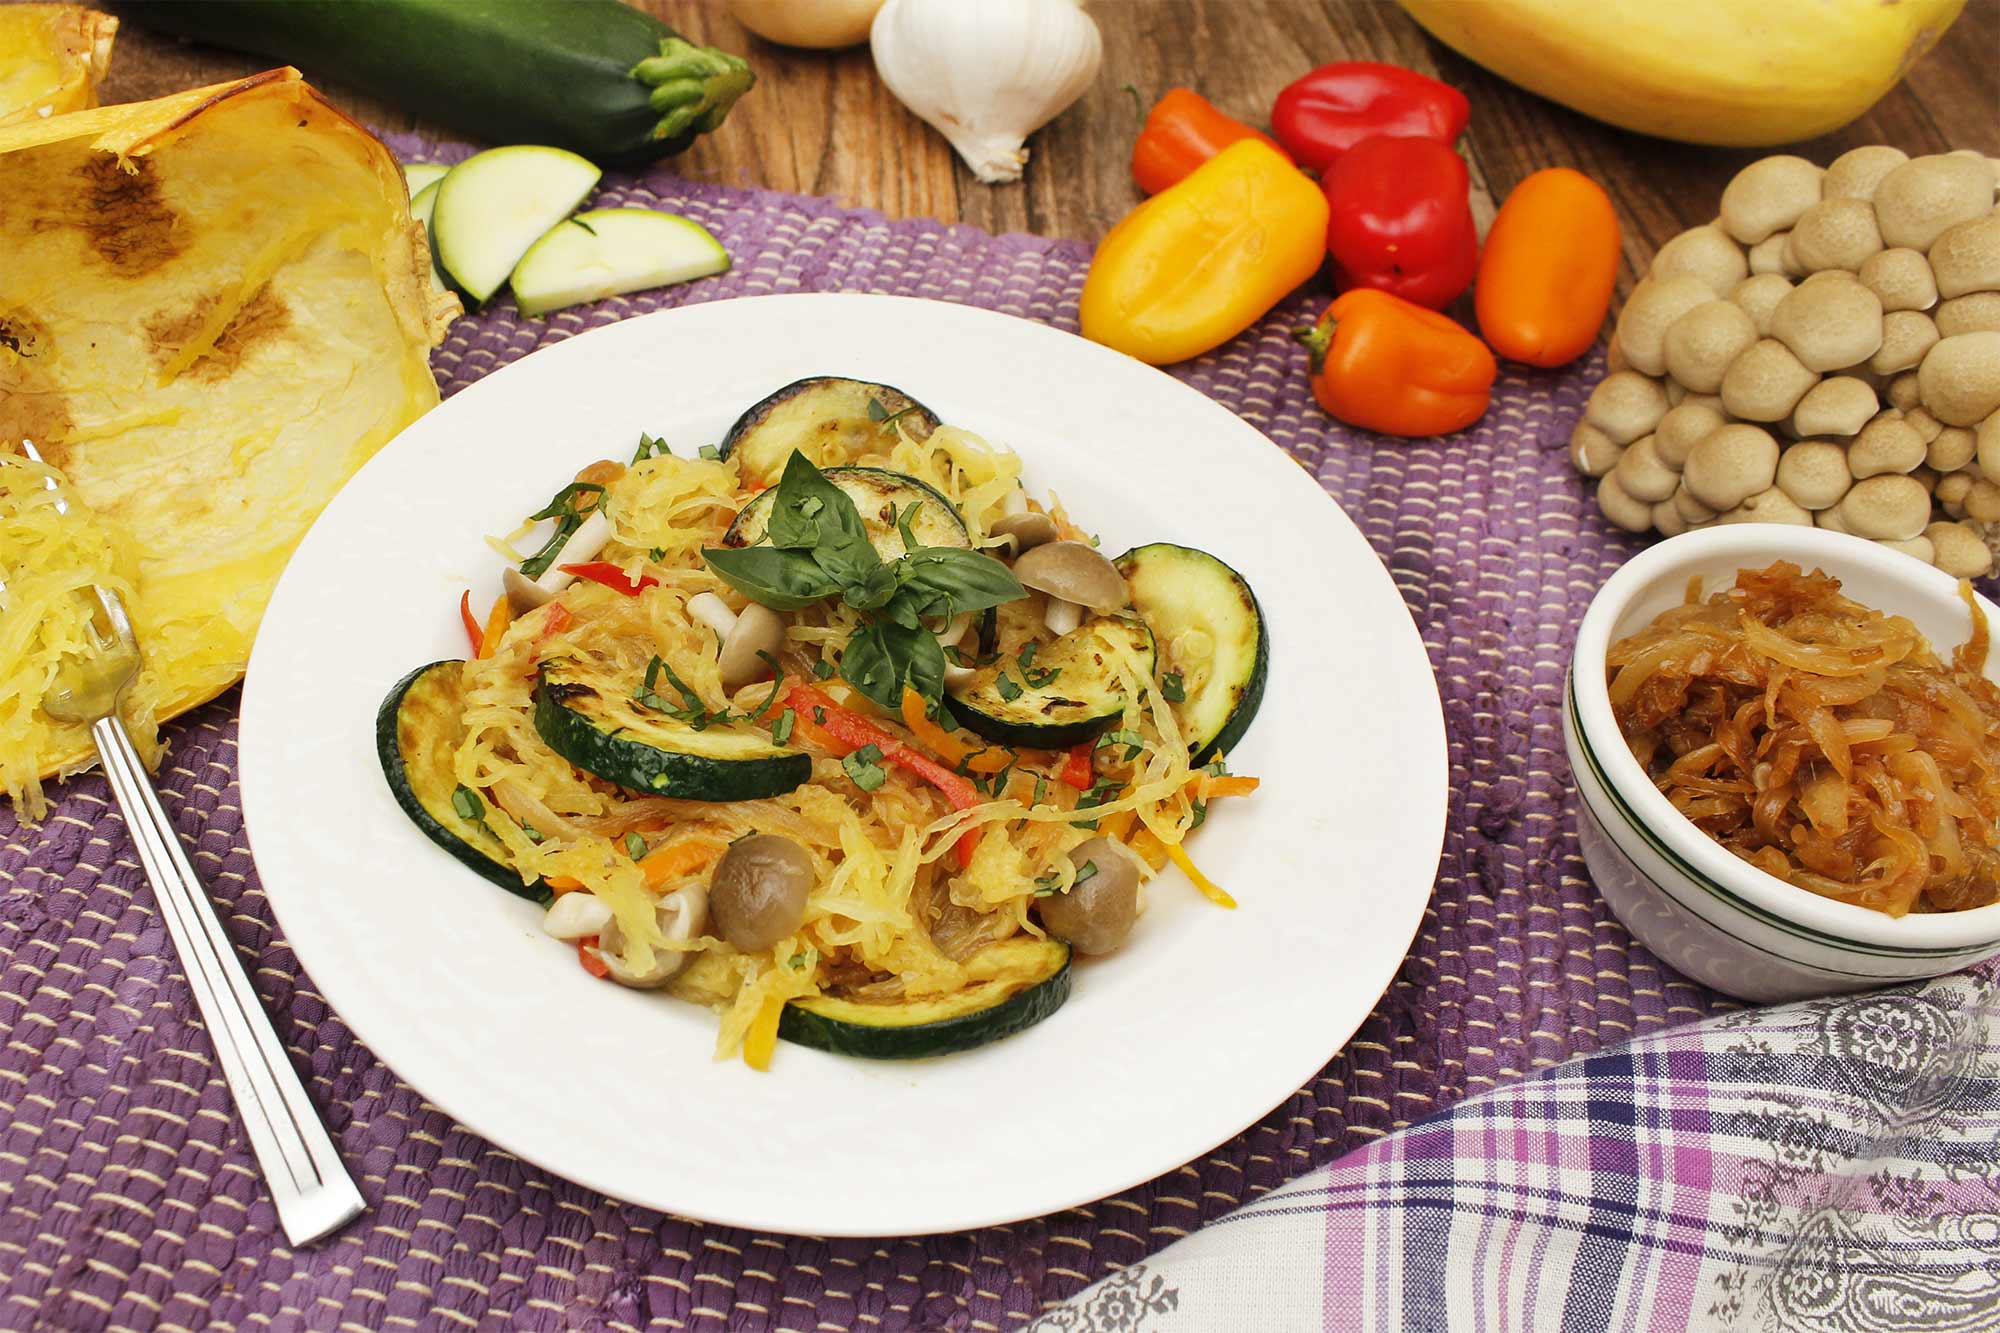 Spaghetti Squash with Caramelized Onions and Zucchini